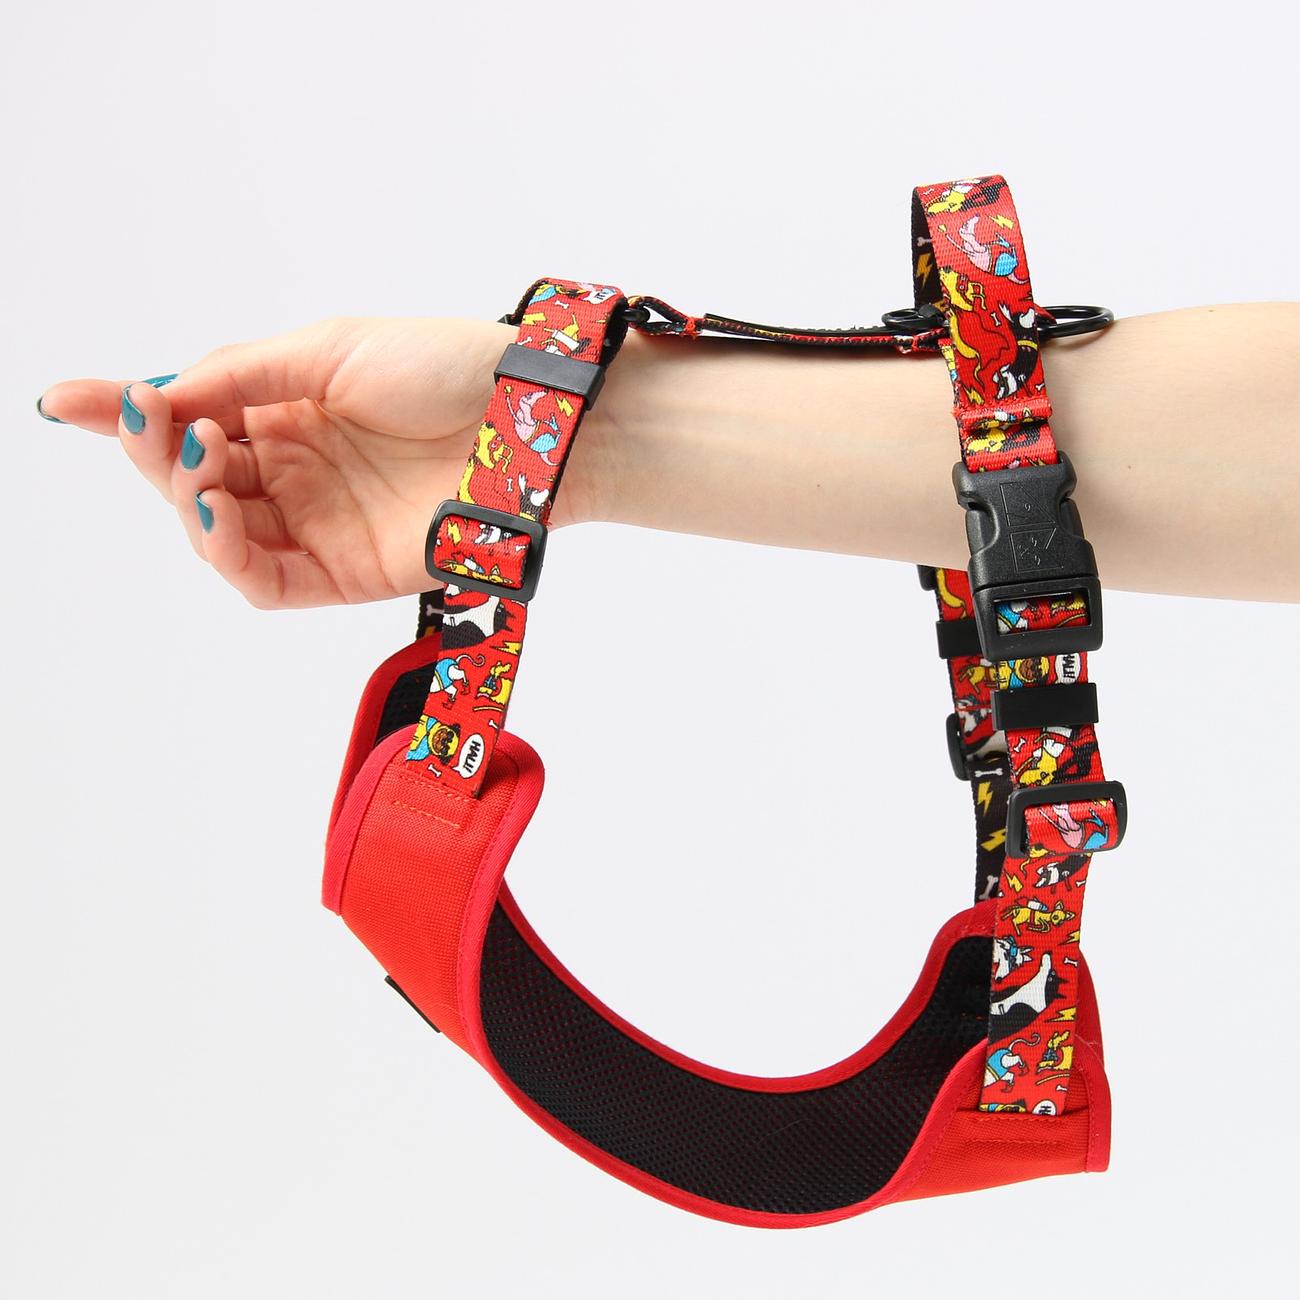 Stay-on pressure-free harness "Woof for the better world"